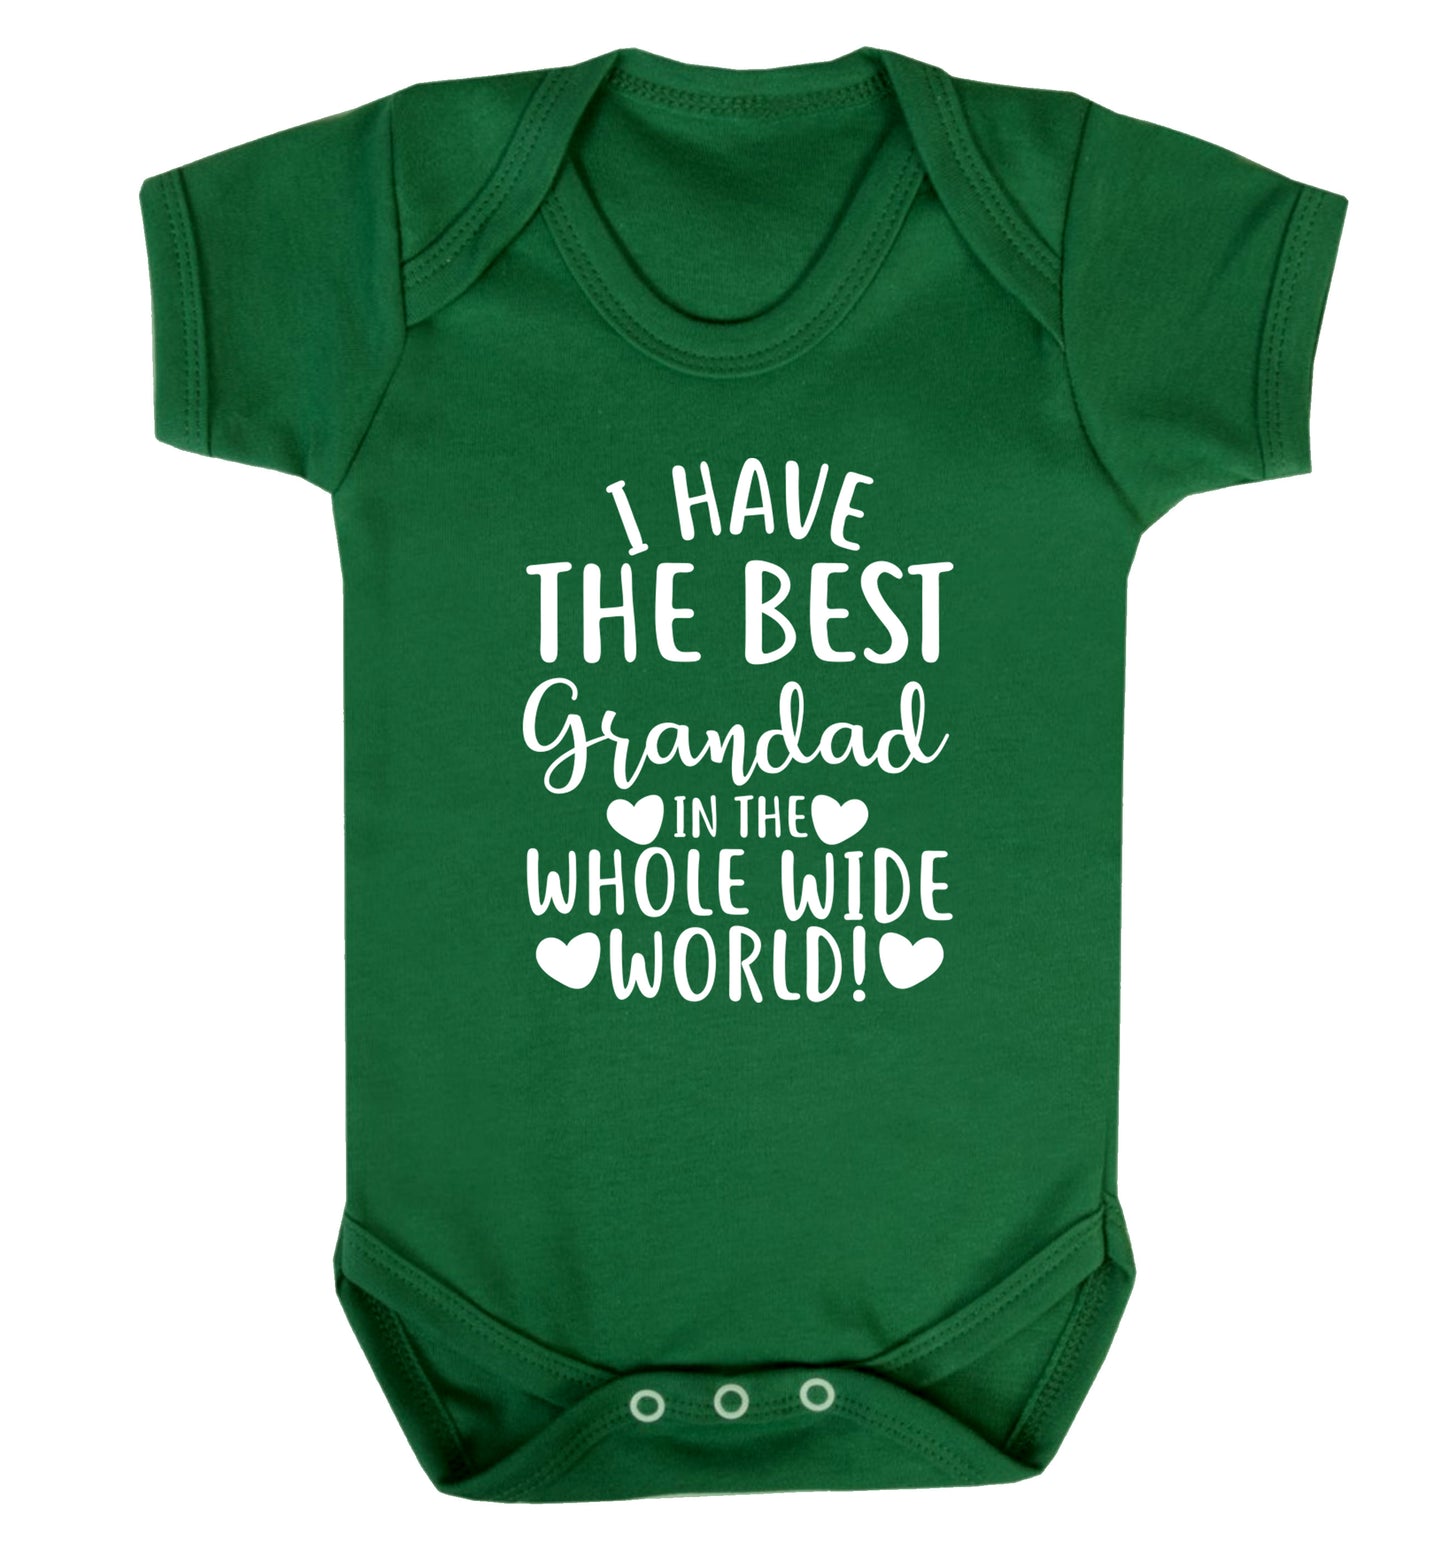 I have the best grandad in the whole wide world! Baby Vest green 18-24 months